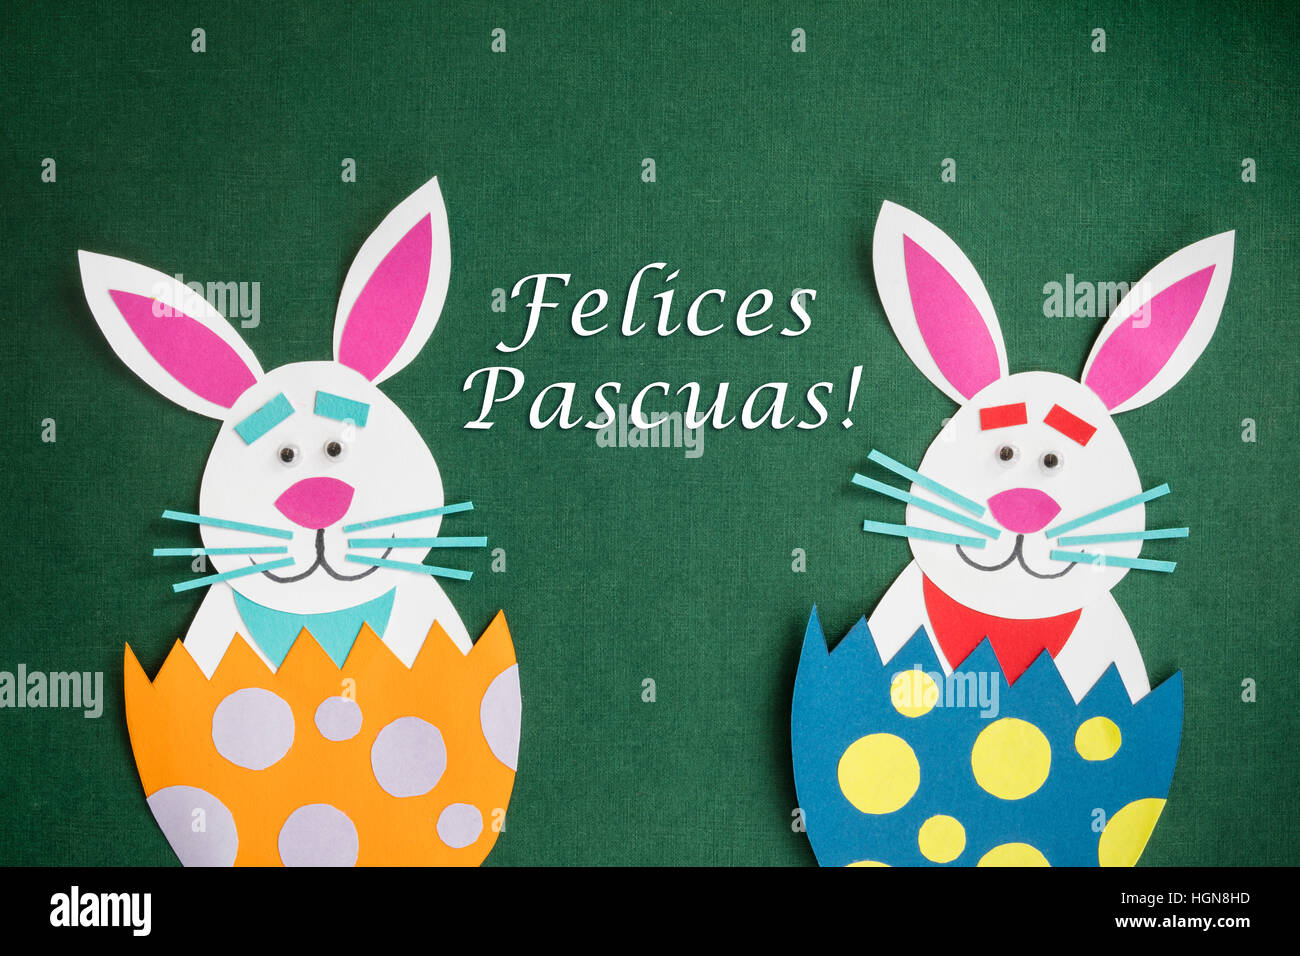 Funny handmade cartoon rabbits placed inside eggs and text in Spanish 'Felices Pascuas', which means 'Happy Easter holidays'. Stock Photo